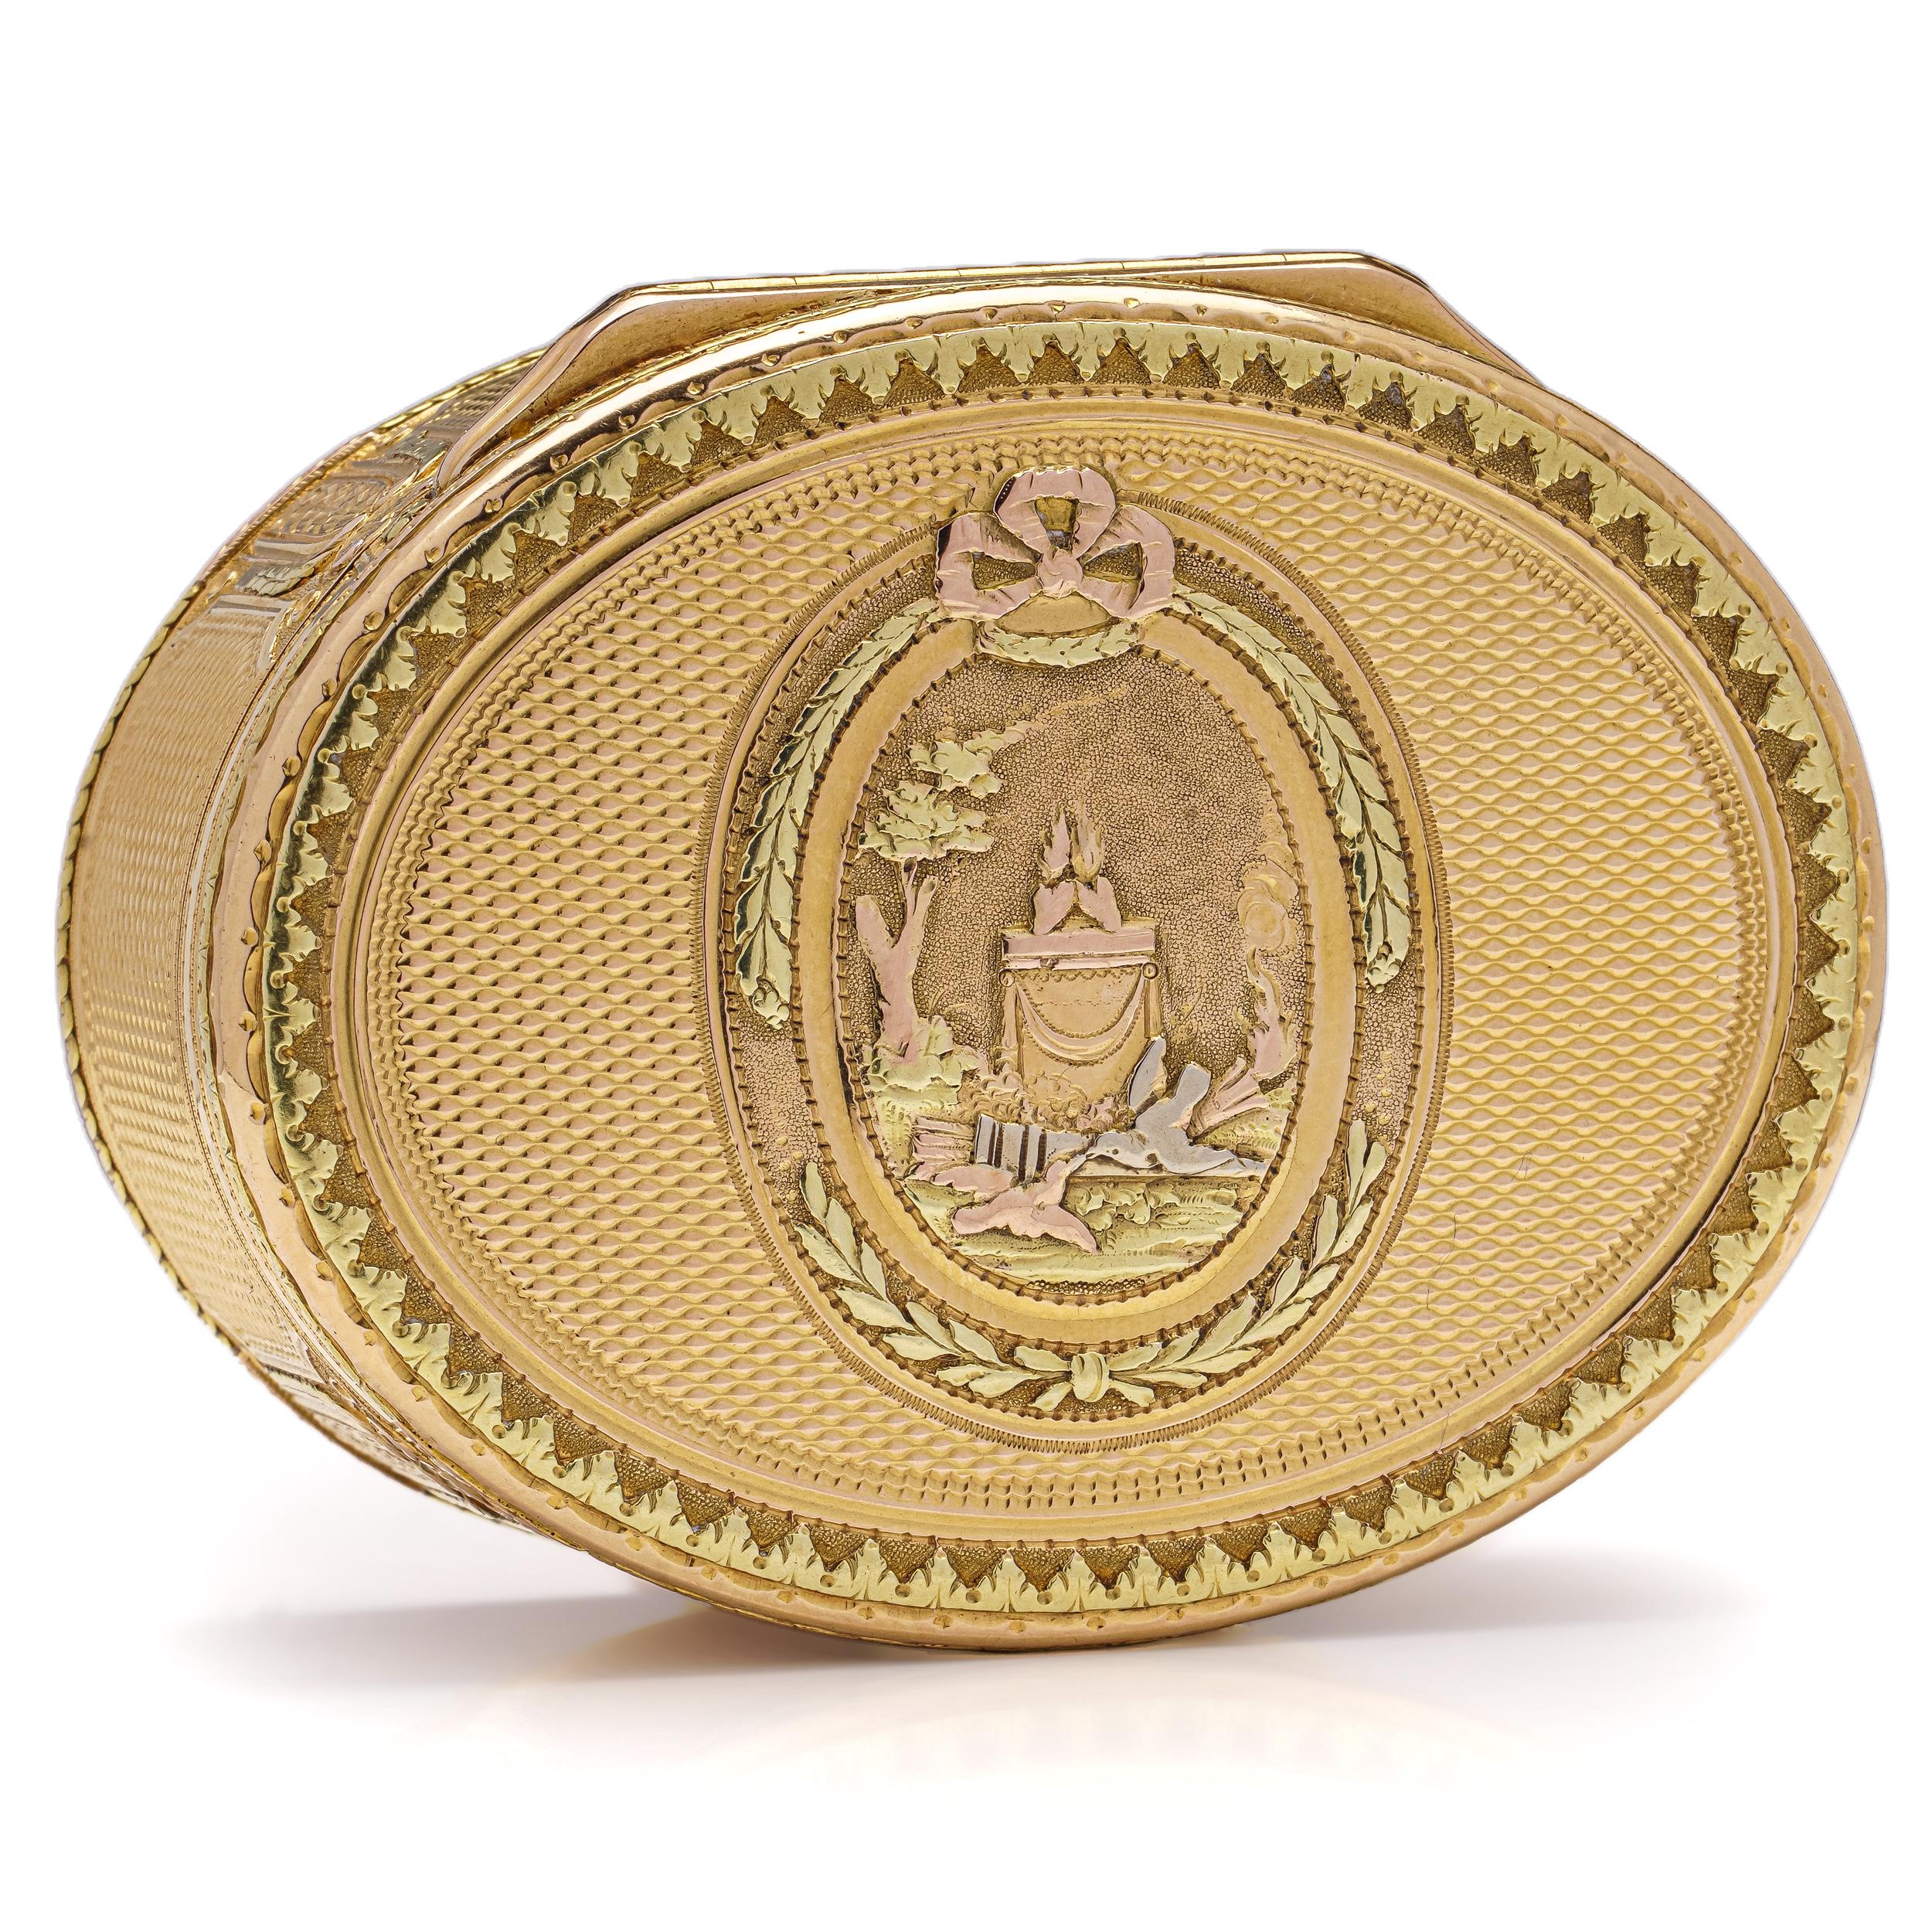 Louis XVI Period Antique 18th Century French vari-coloured 18kt gold oval shaped For Sale 3